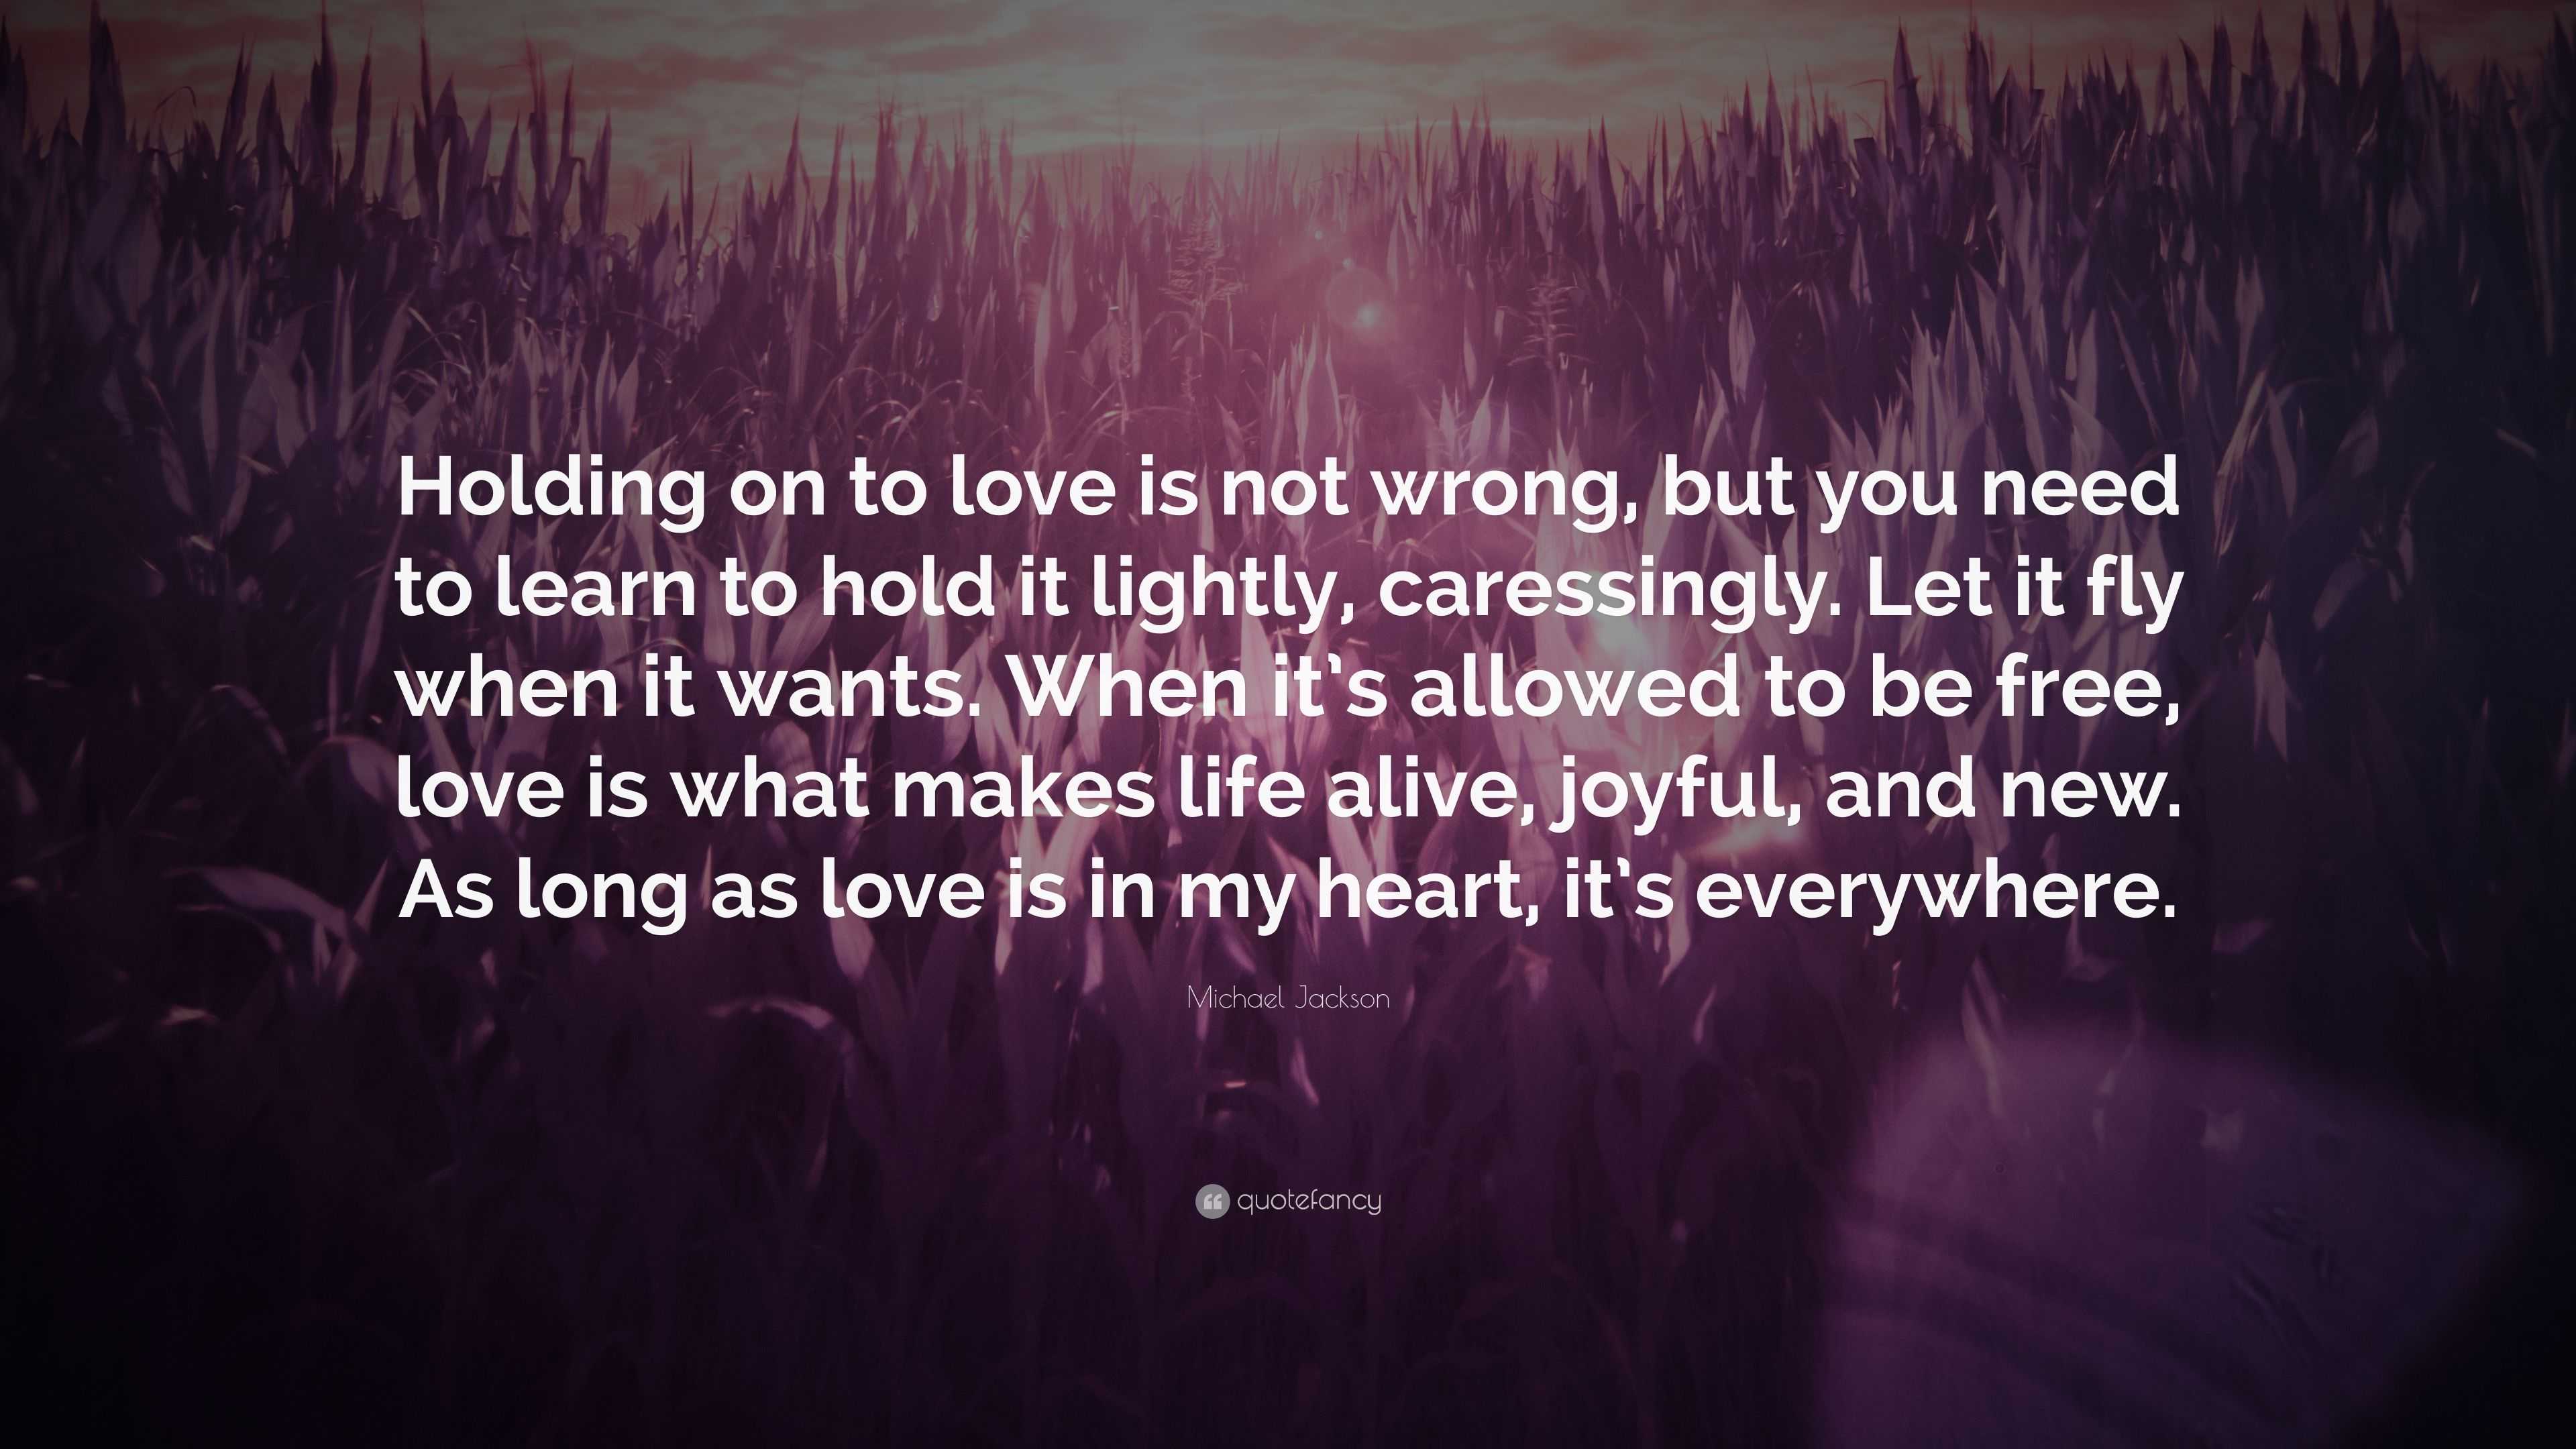 what is wrong about love